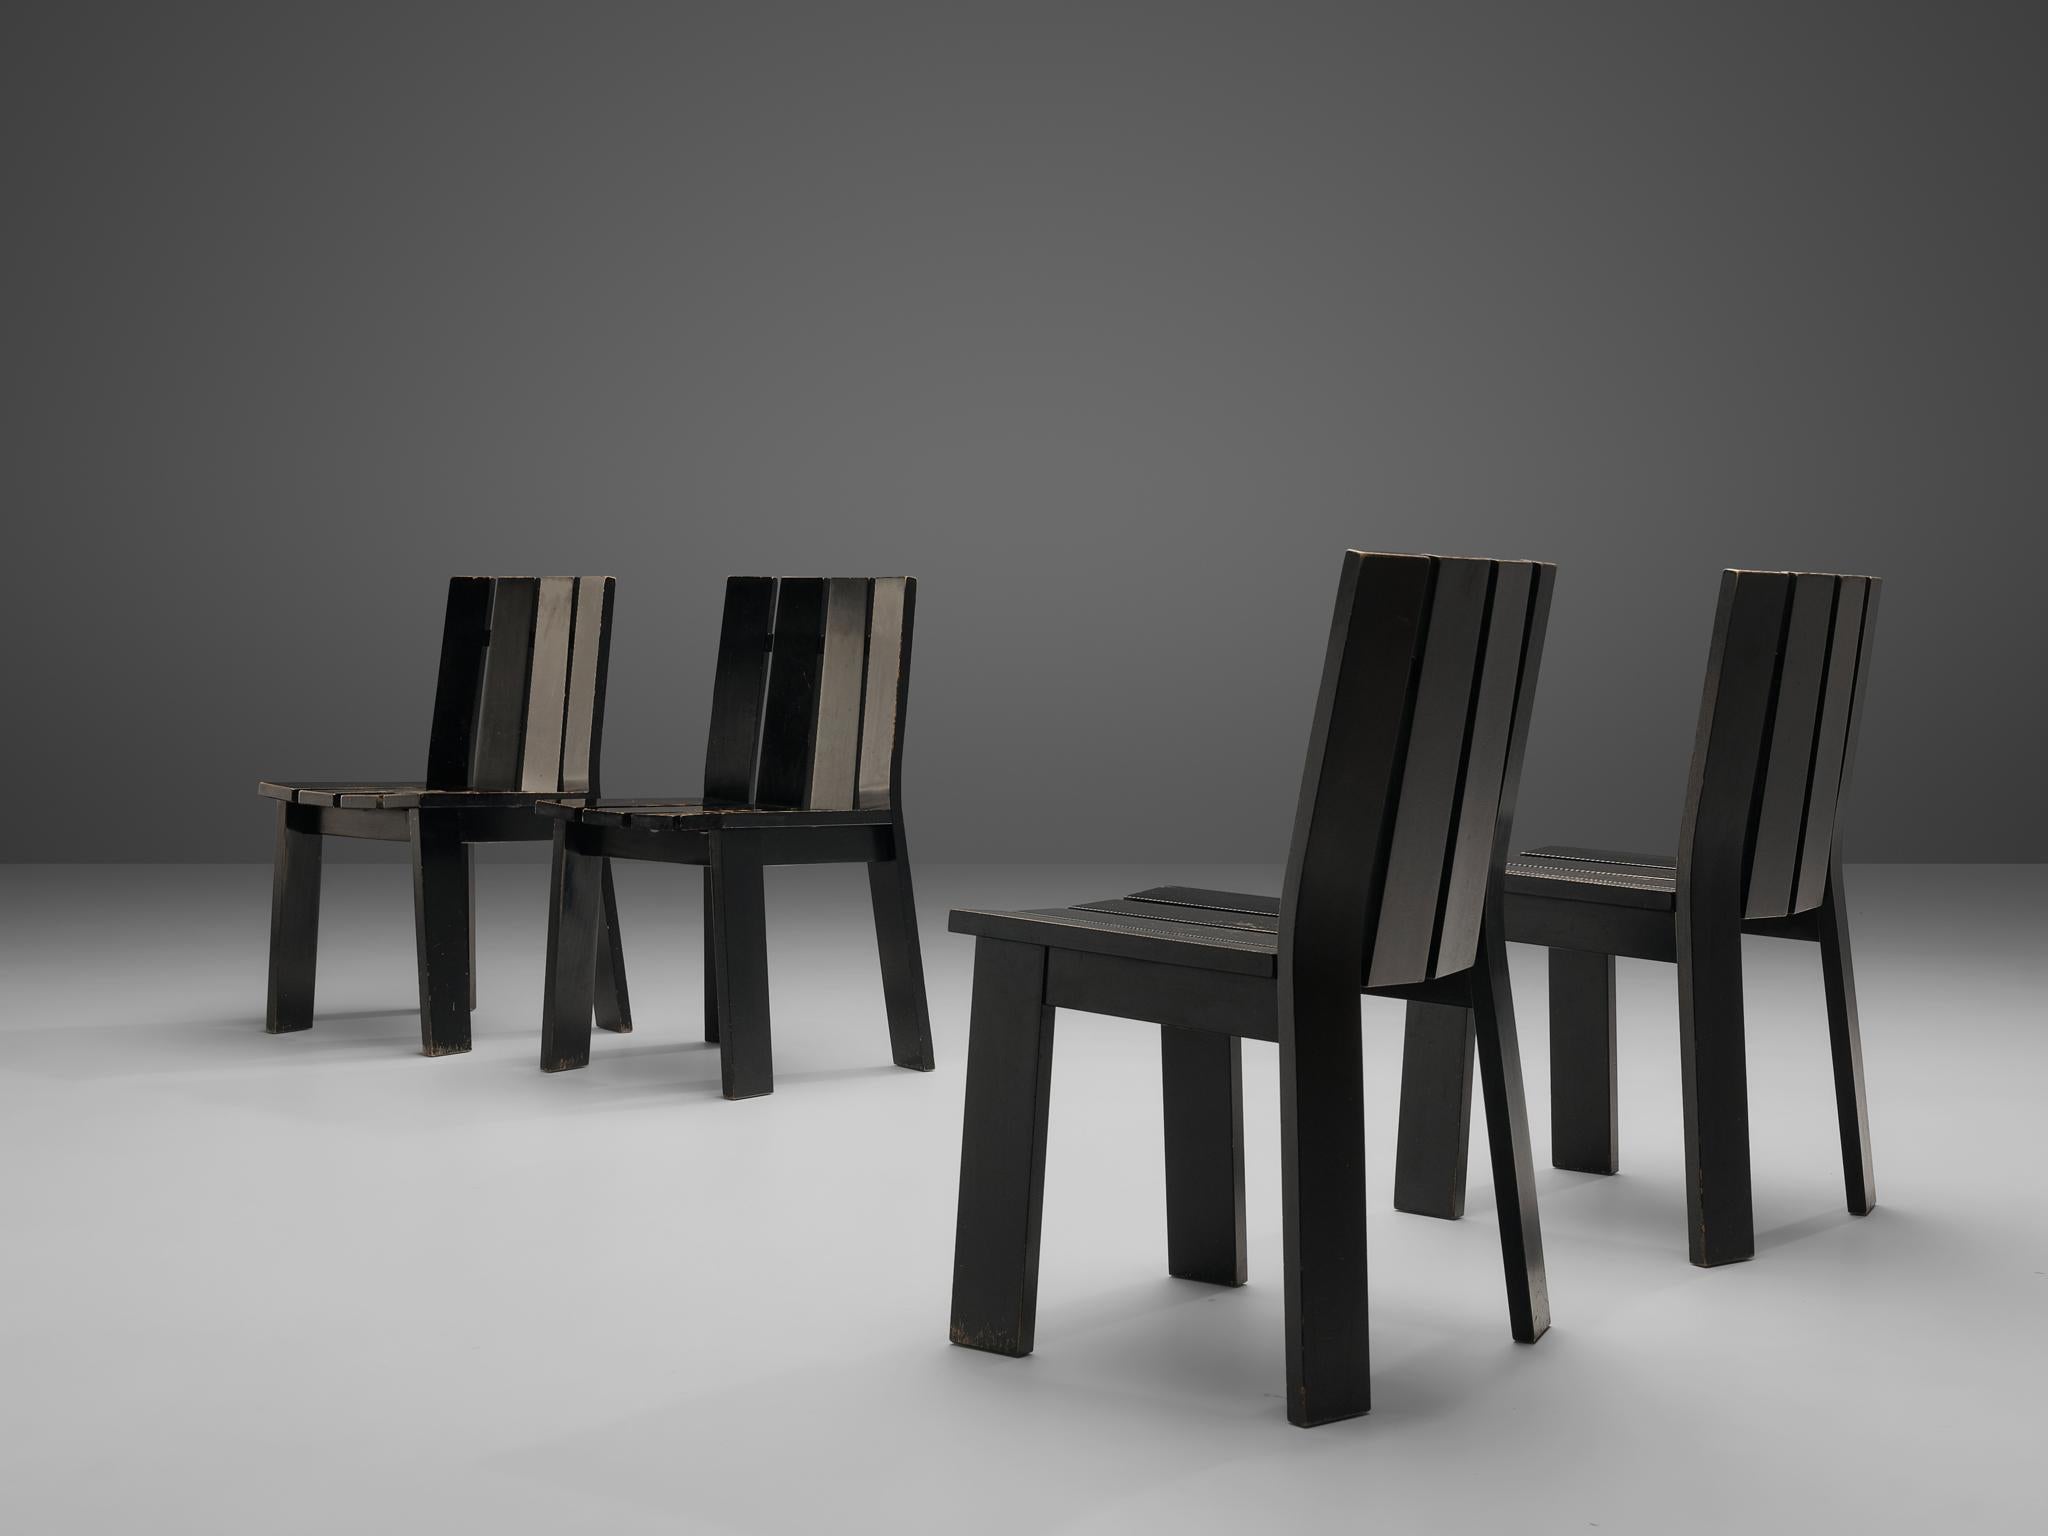 Set of four dining chairs, black lacquered wood, The Netherlands, 1970s

A robust set of dining chairs crafted entirely from wooden planks reminiscent of the design by Gerrit Rietveld. The design, characterized by its restraint and simplicity, is